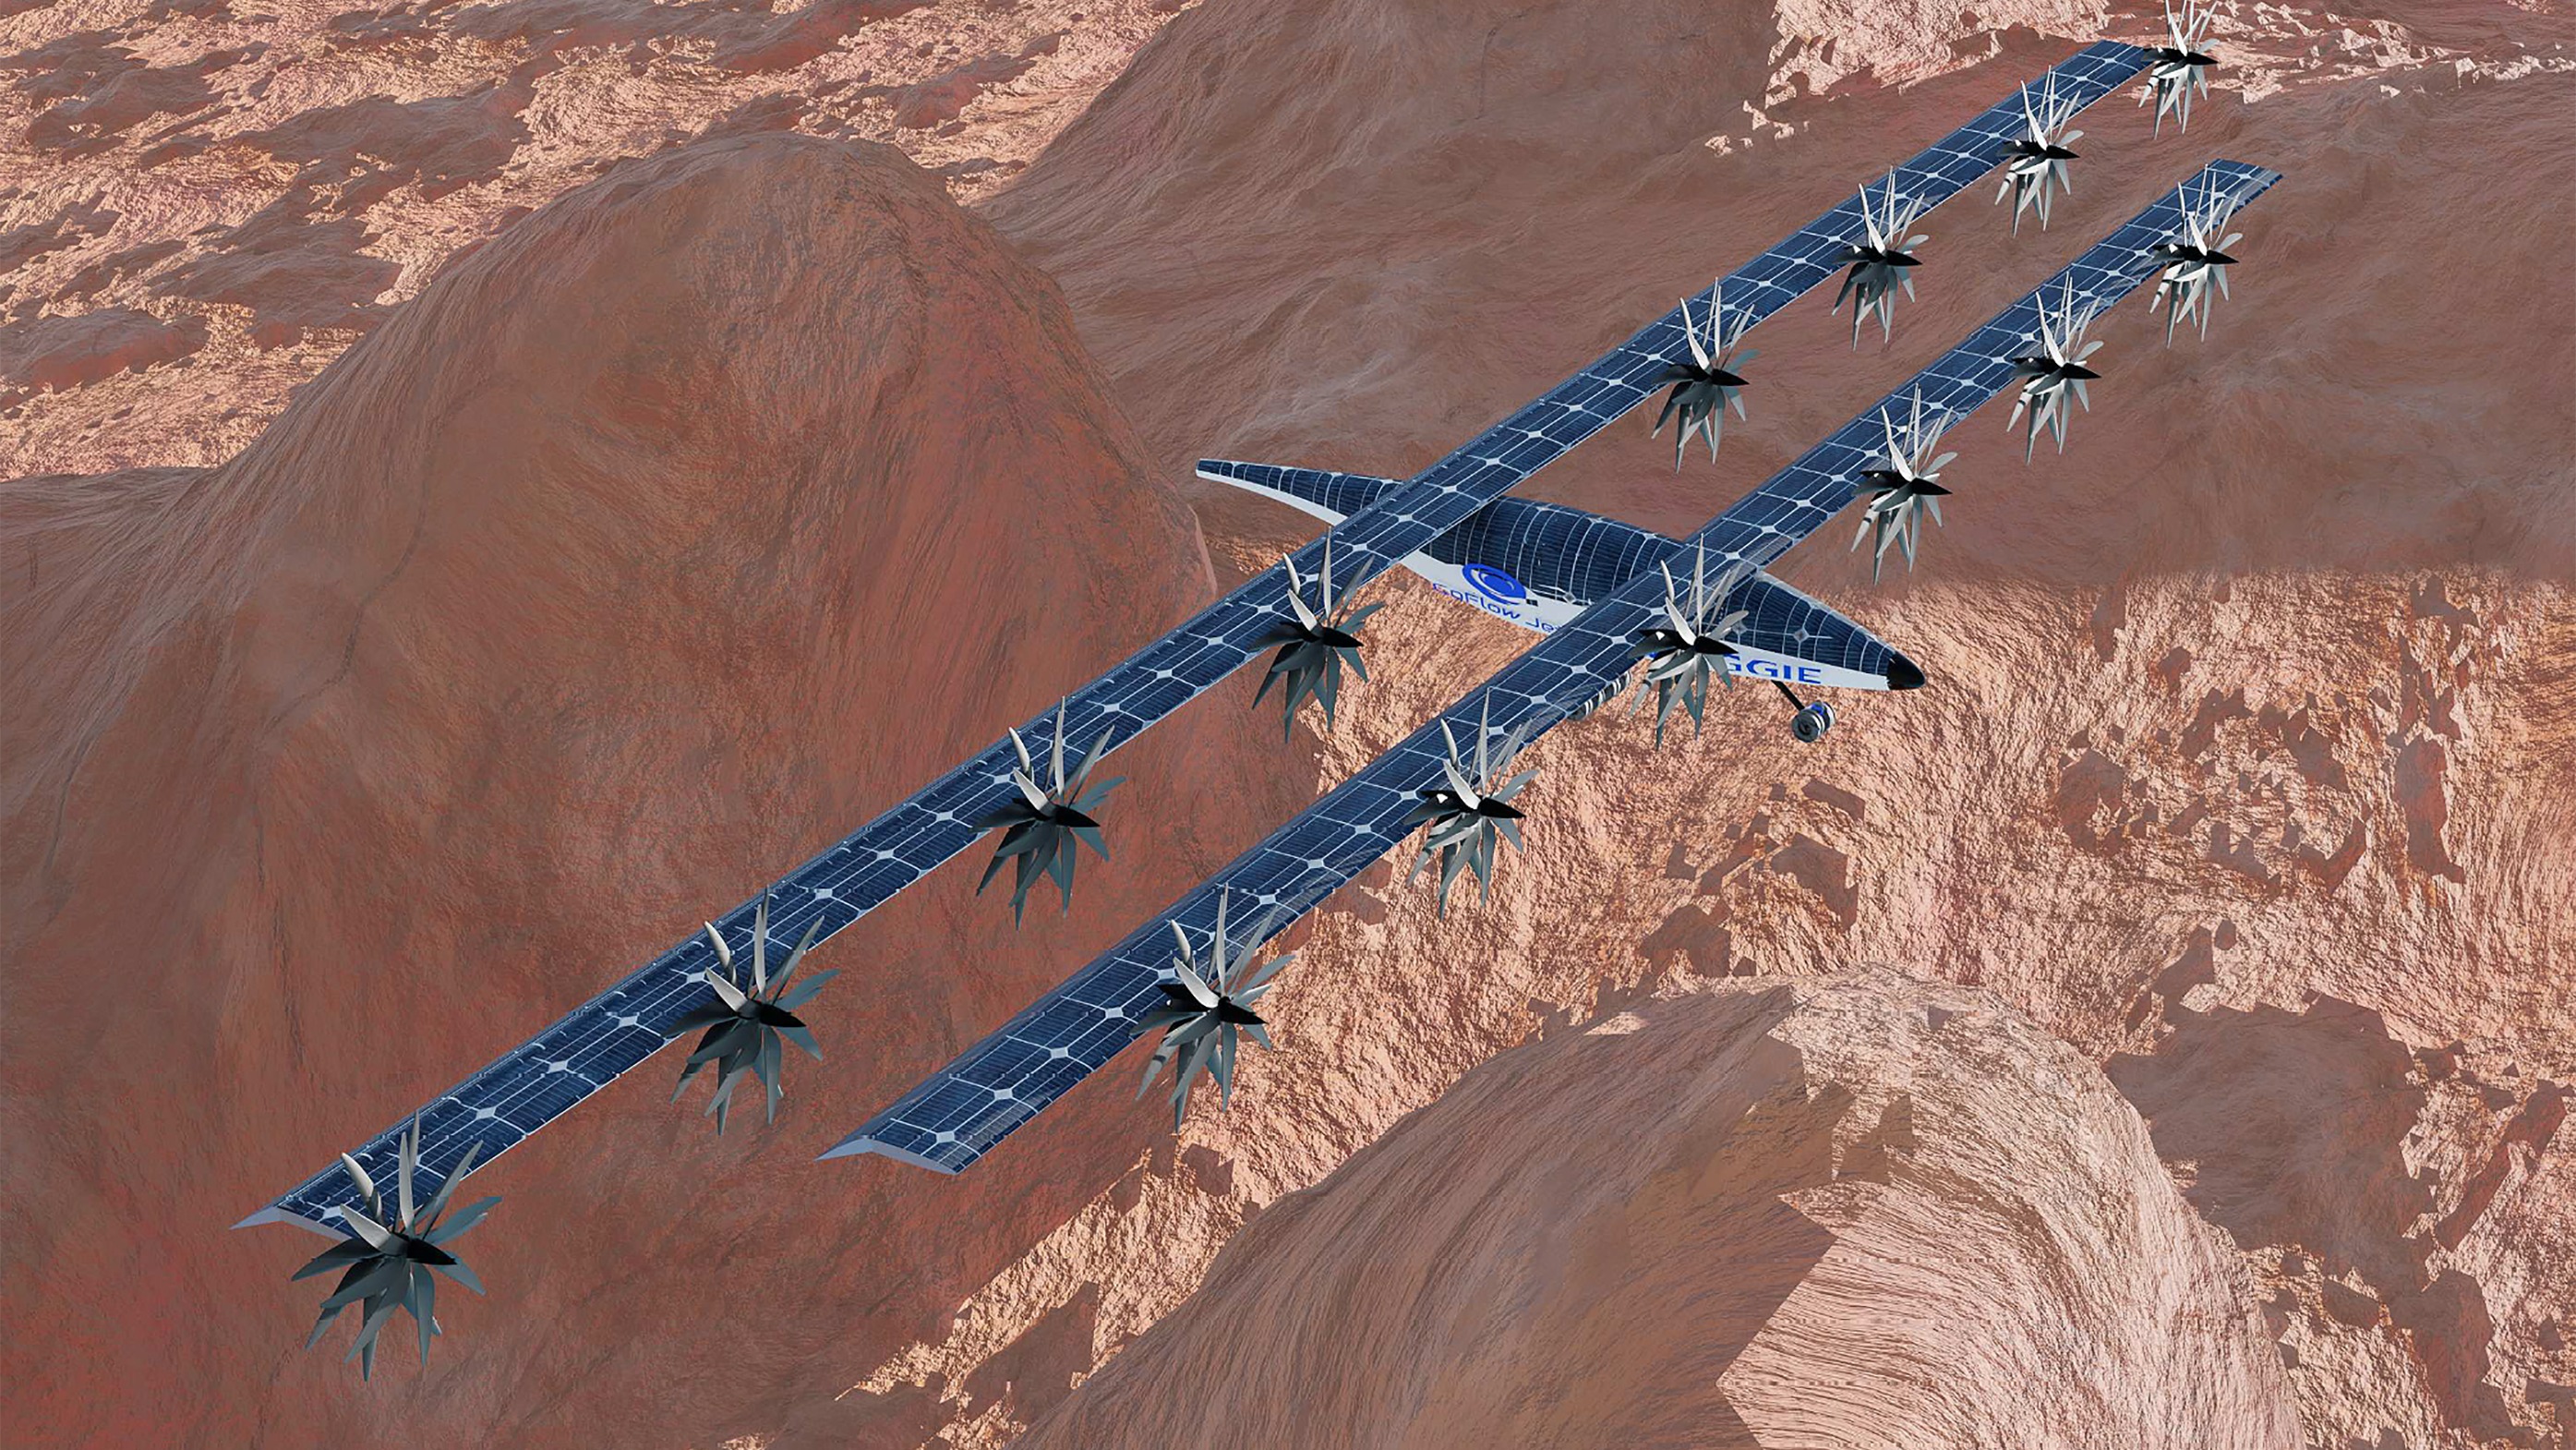 Wild Mars plane concept could seek water from high in the Red Planet’s atmosphere